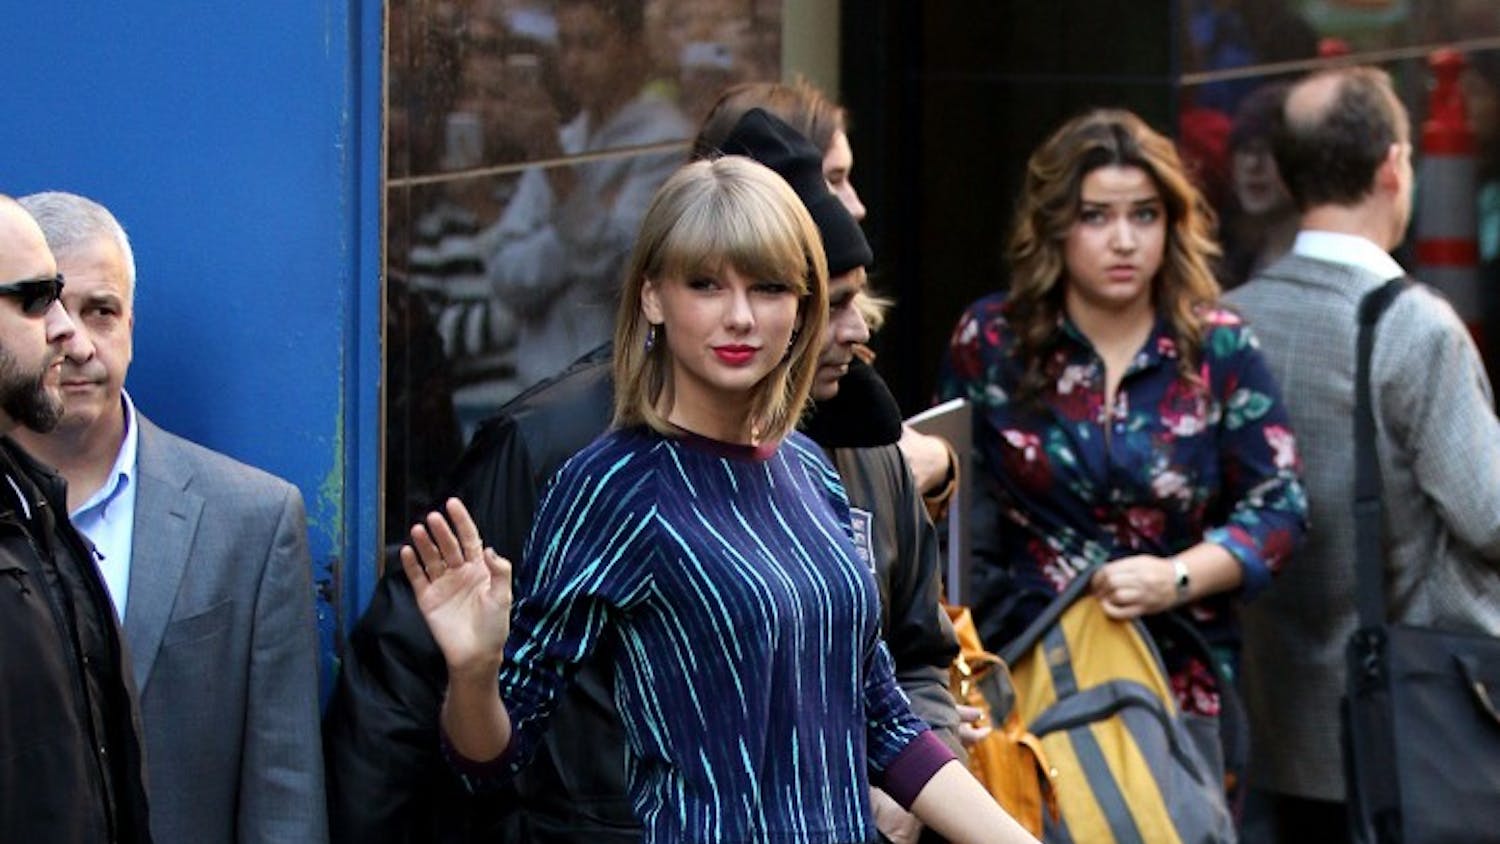 Taylor Swift makes an appearance at Good Morning America on Oct. 27, 2014. (Zelig Shaul/Ace Pictures/Zuma Press/MCT)